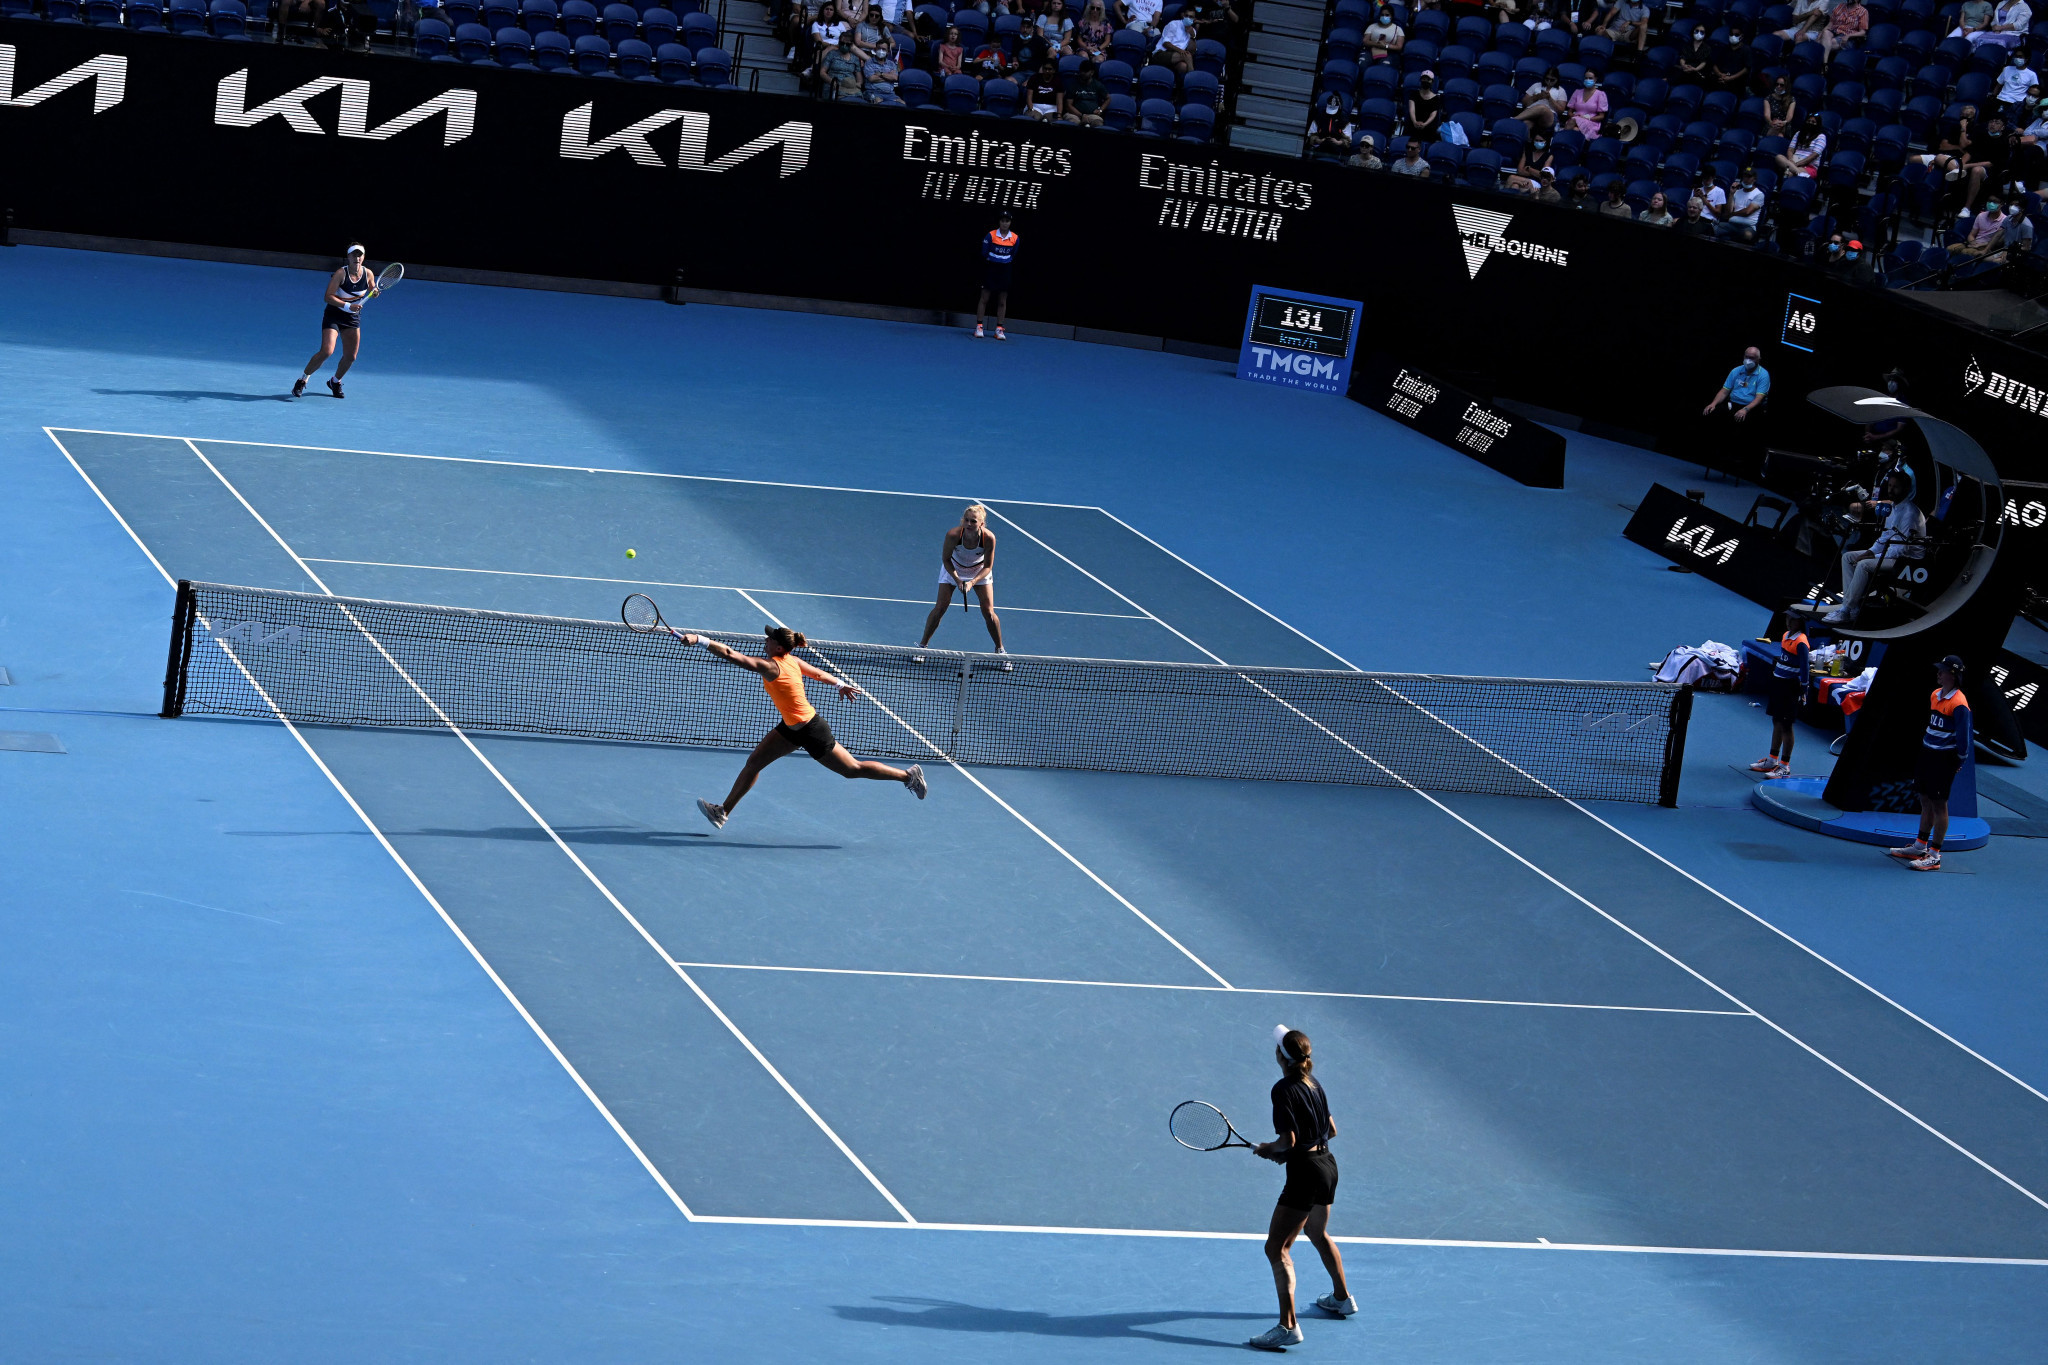 Top seeds Krejcikova and Siniakova, pictured at the far end of the court, triumphed in three sets to claim a first Australian Open ladies doubles title ©Getty Images